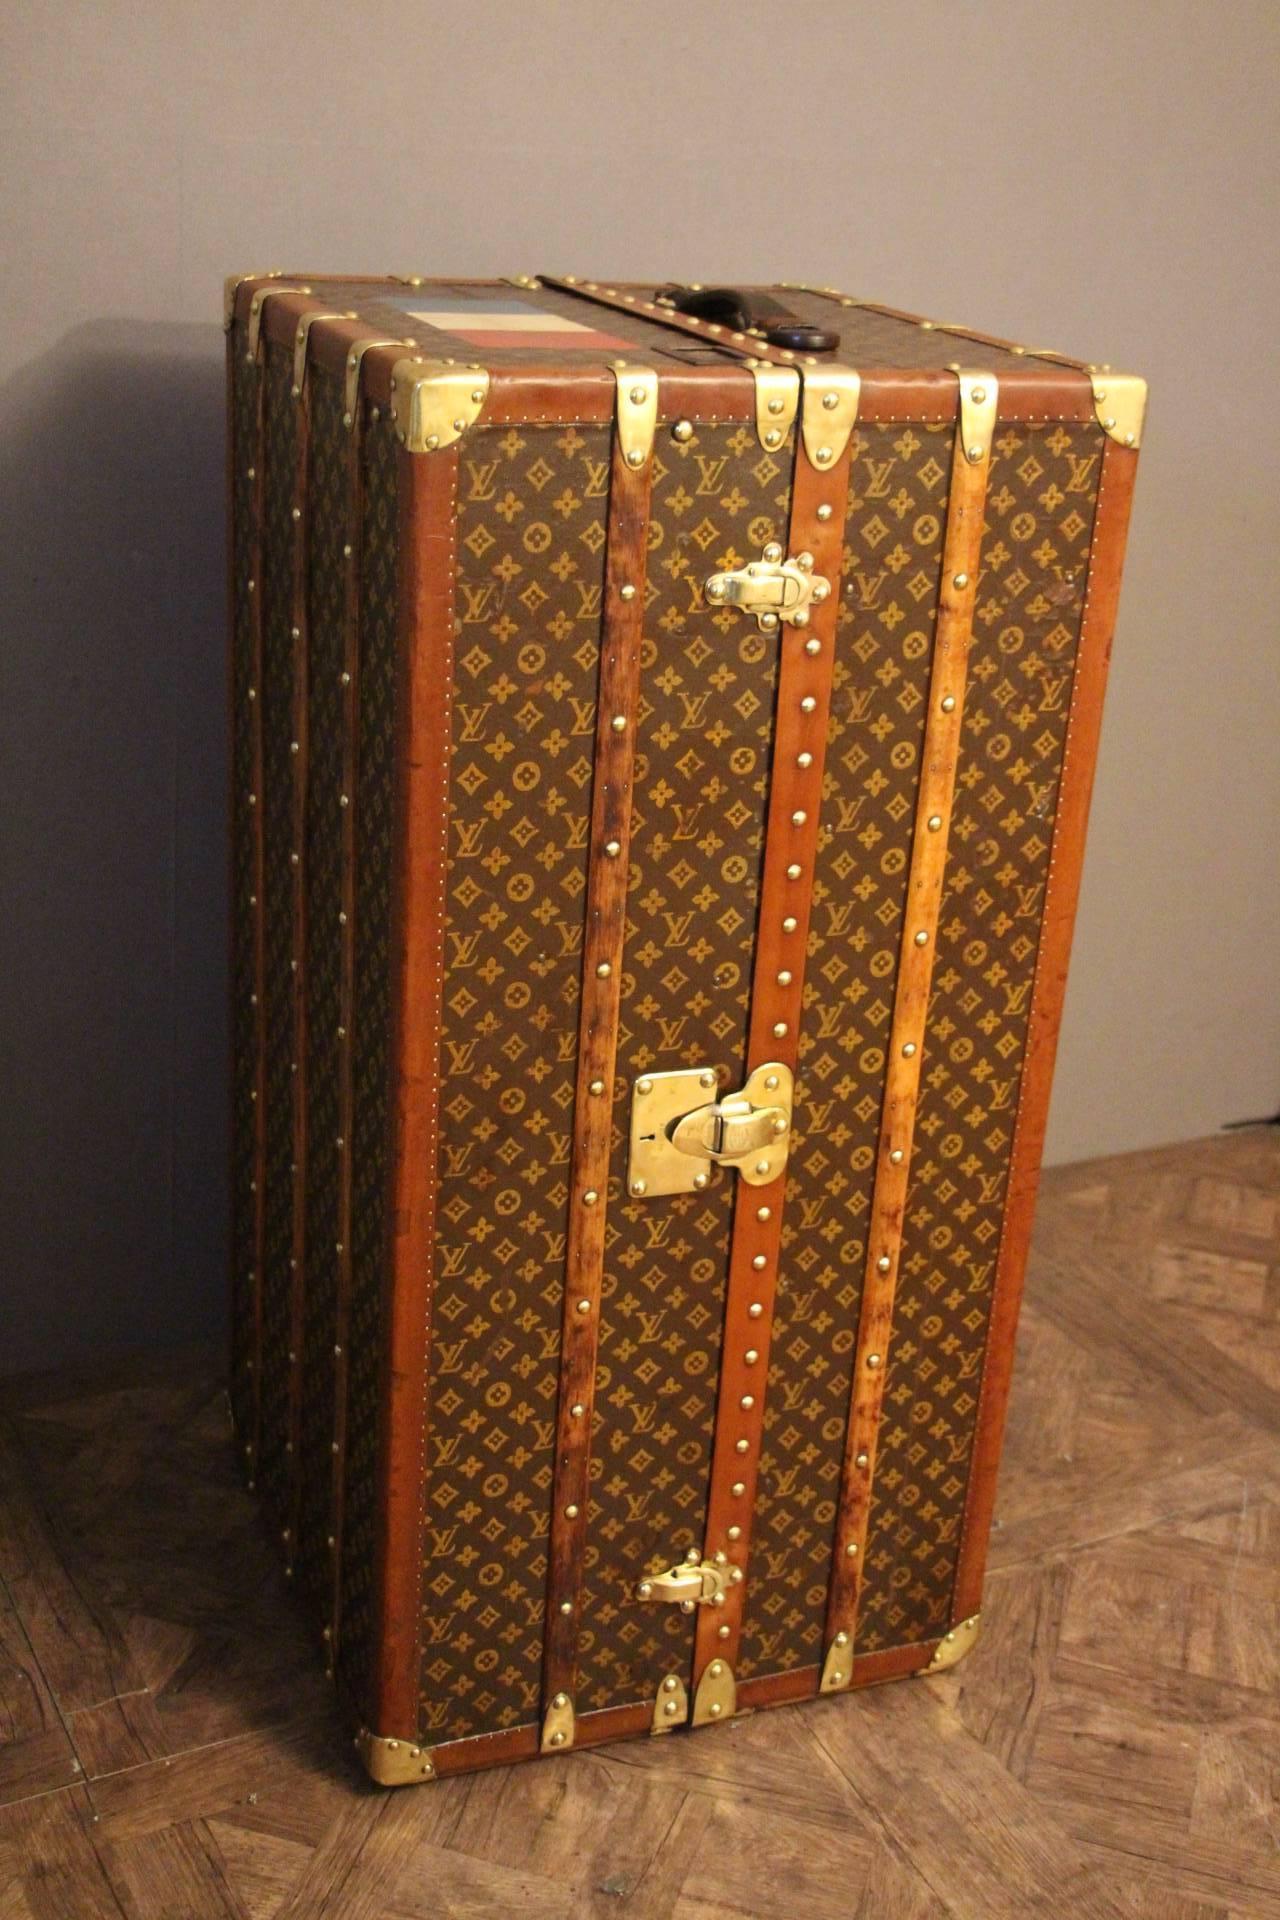 This beautiful wardrobe steamer trunk from Louis Vuitton features stencilled monogram canvas, leather top handle, solid brass locks, corners and all LV stamped studs. Very warm patina.
Very nice interior too with a folding hanger section a shoe